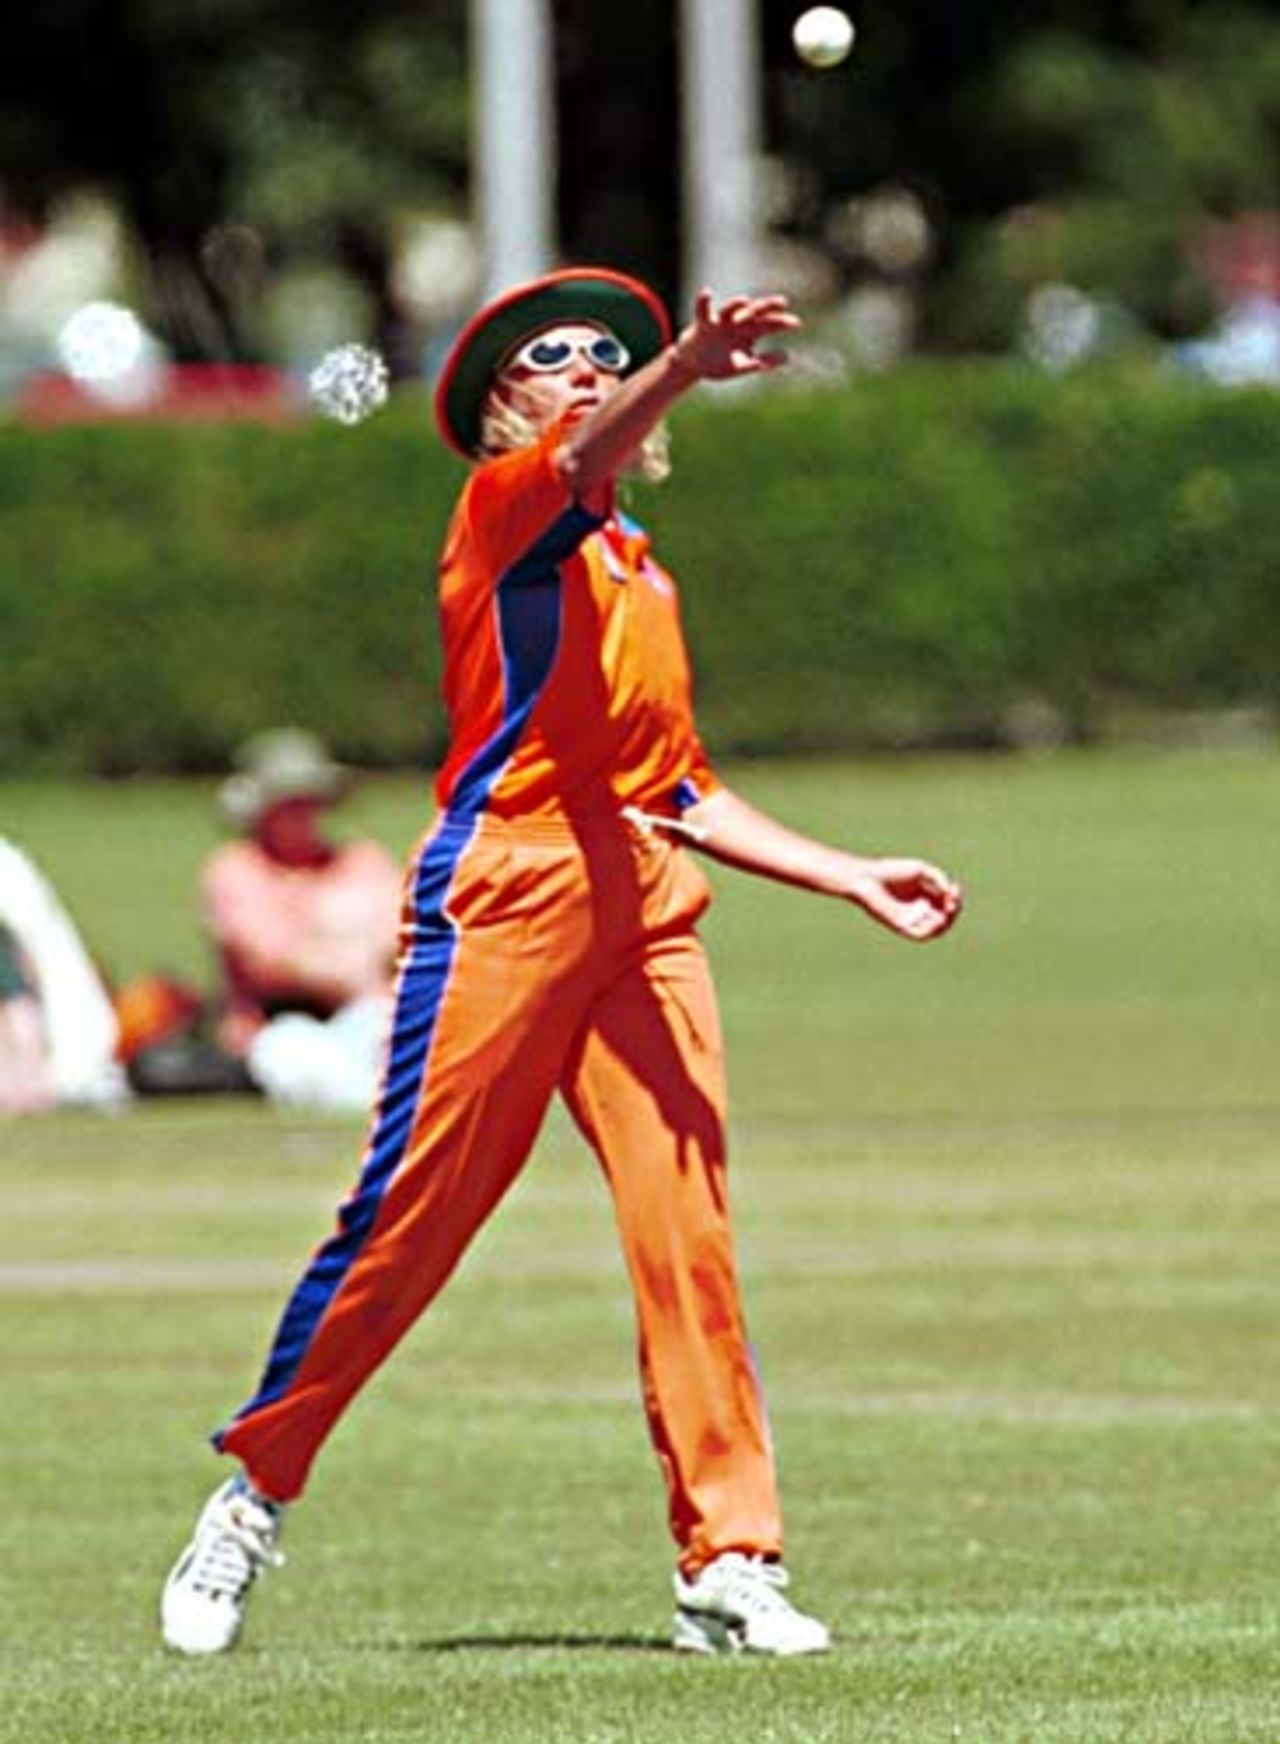 4 Dec 2000: Netherlands v South Africa, CricInfo Women's World Cup 2000 played at Hagley Park no.2, Christchurch